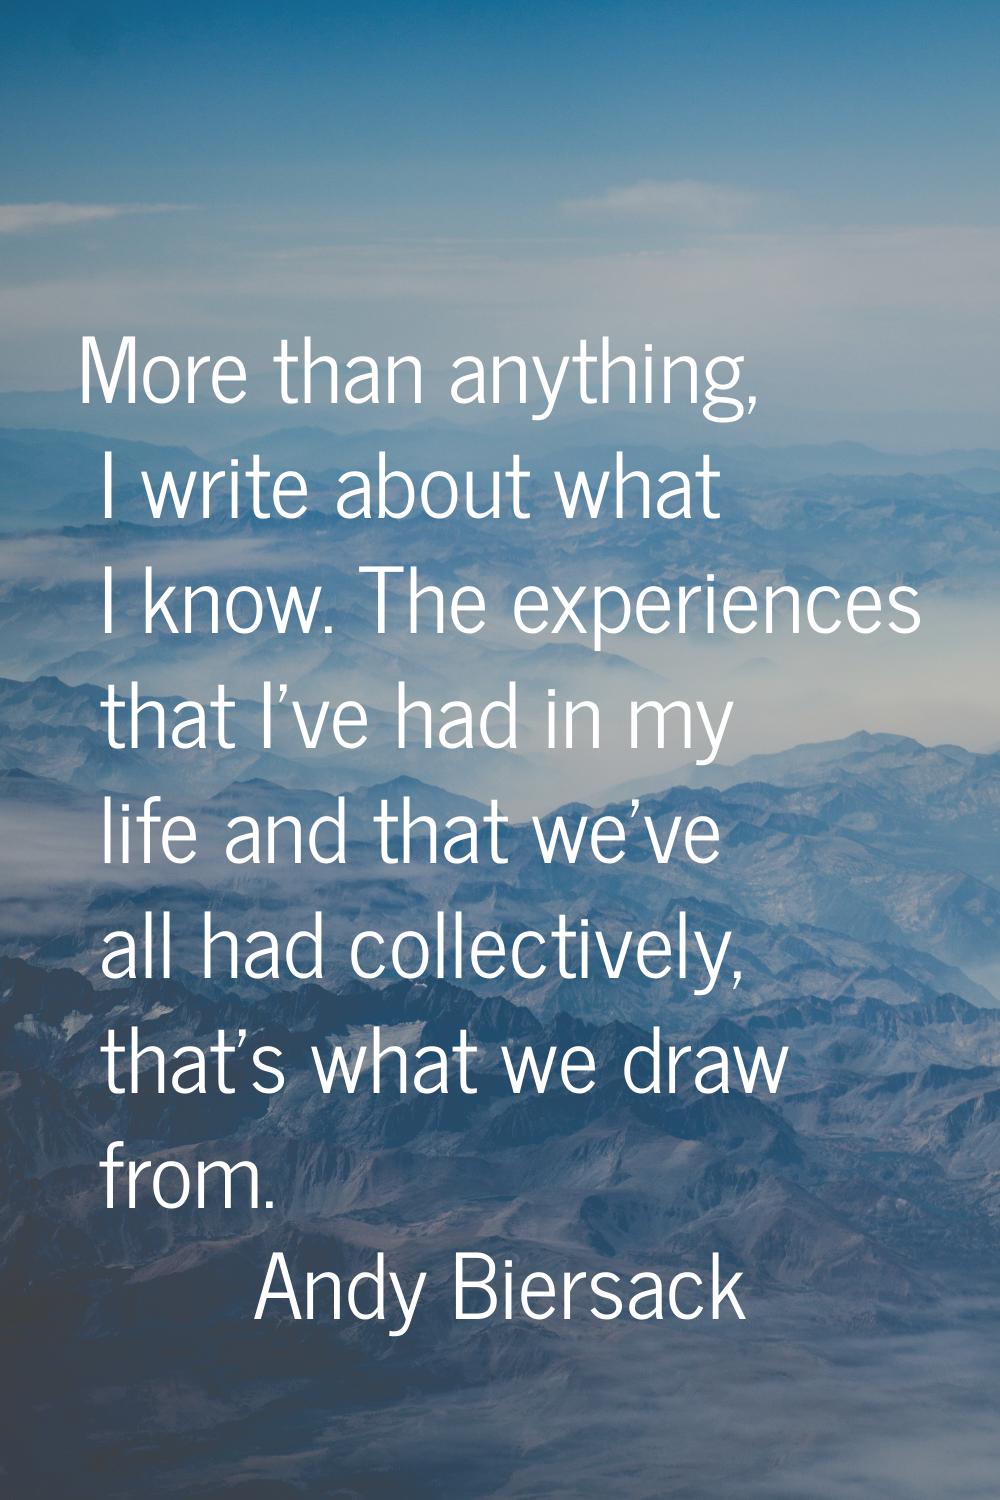 More than anything, I write about what I know. The experiences that I've had in my life and that we